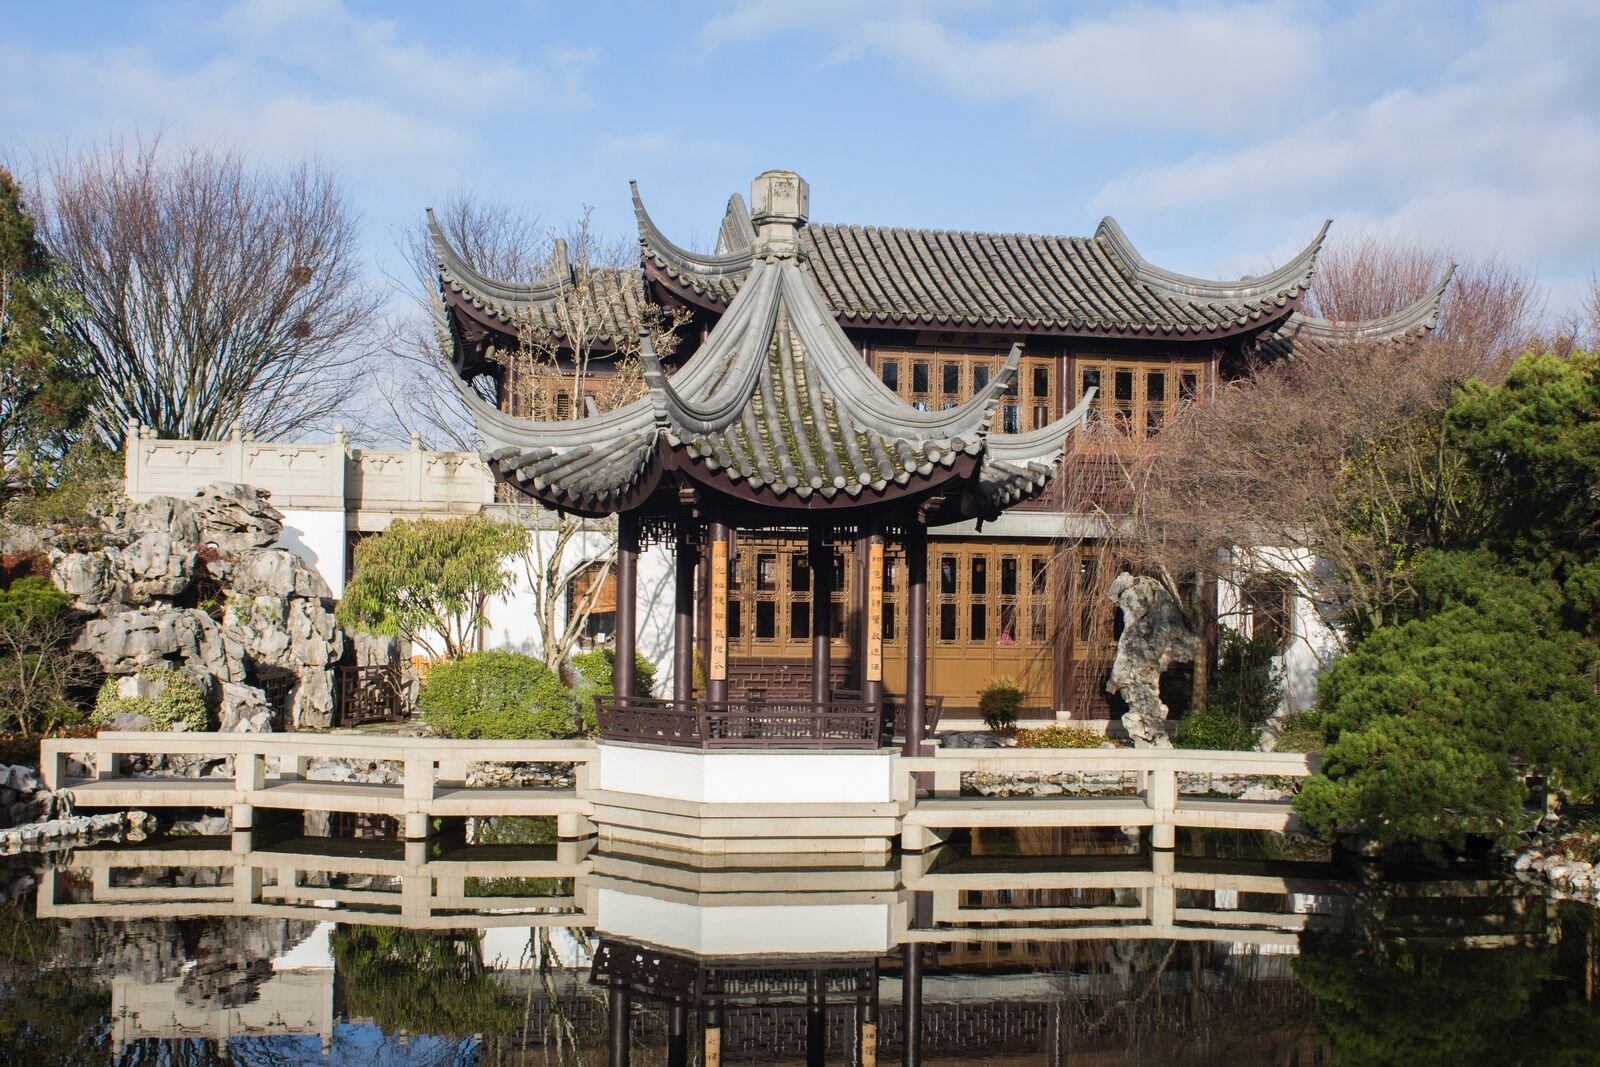 Many ornate traditional Chinese buildings at the Lan Su Chinese Garden. Photo by Sergio Ruiz on Unsplash